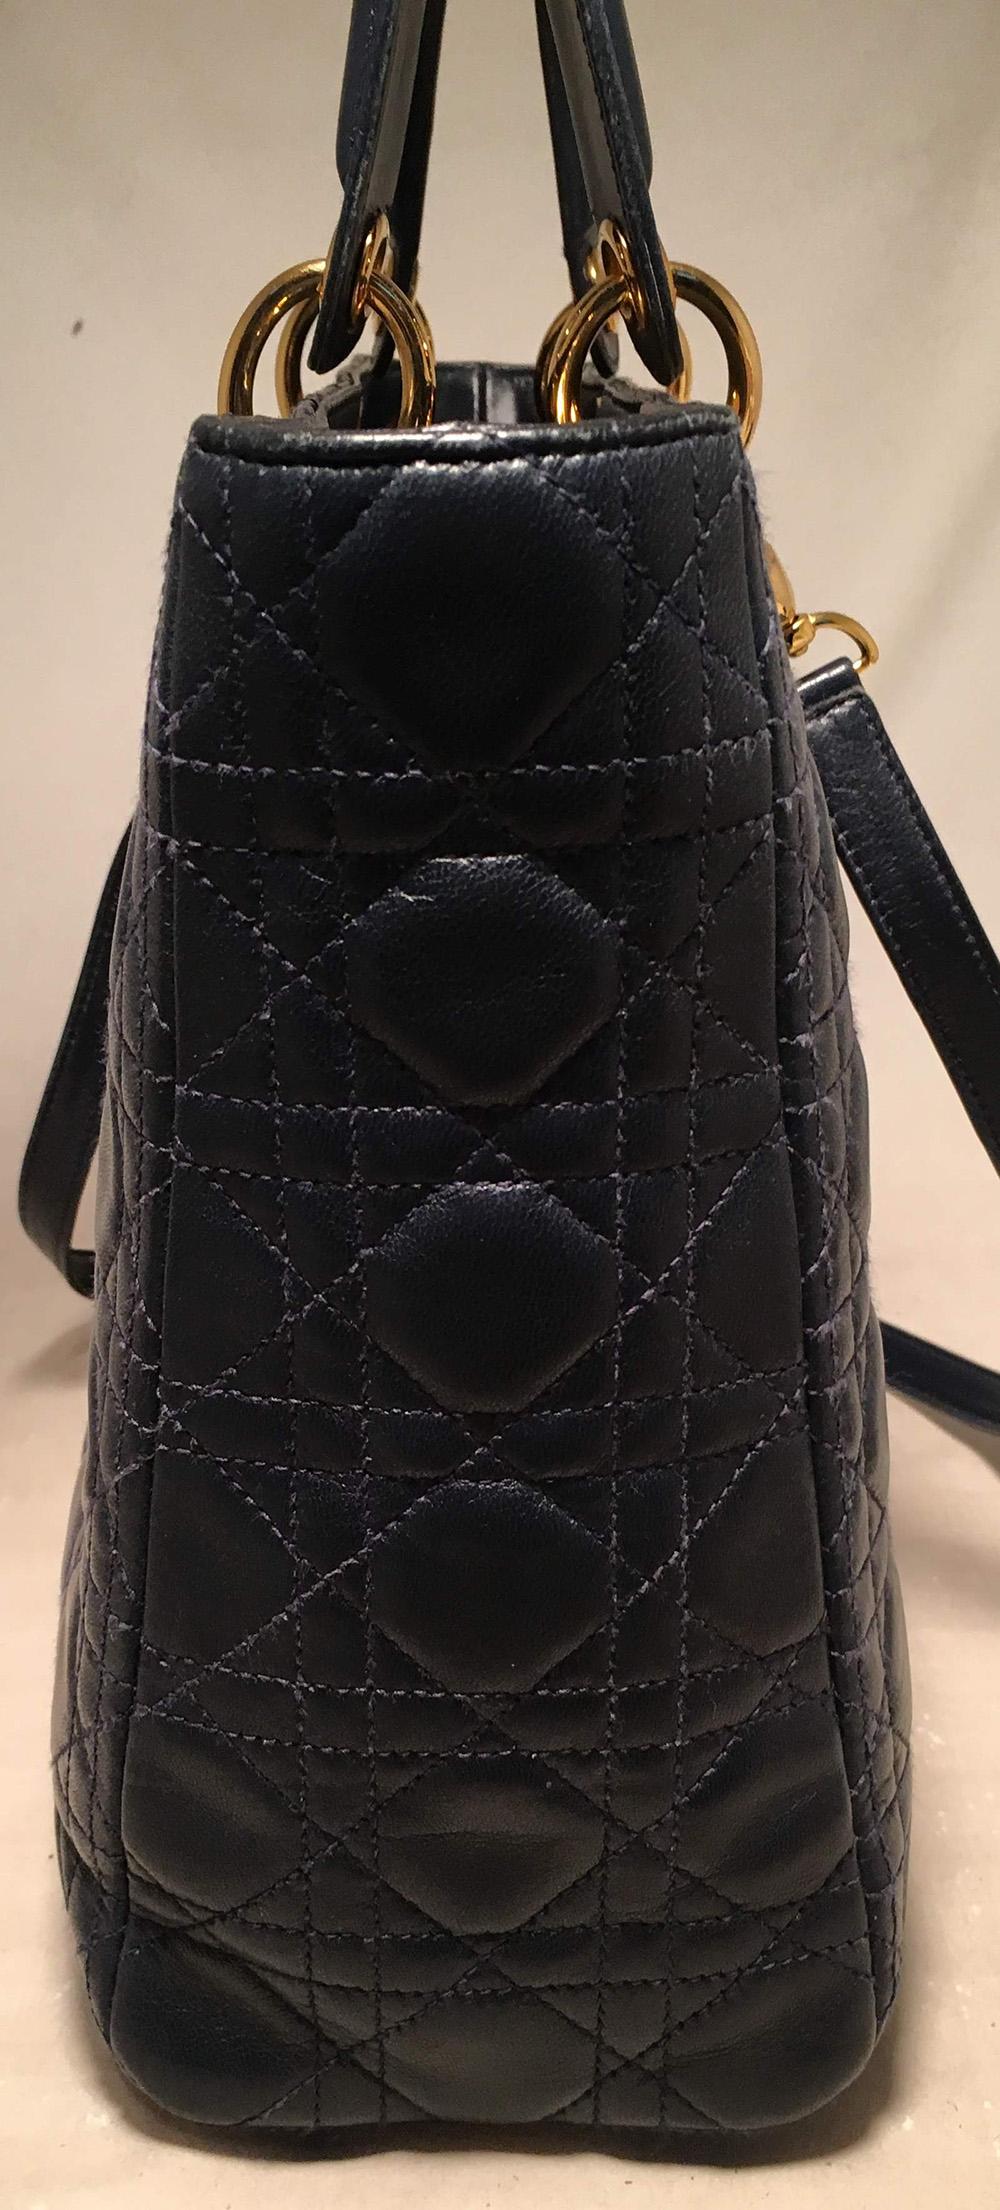 Christian Dior Navy Blue Leather Cannage Quilted Large Lady Dior Bag in excellent condition. Navy blue cannage quilted leather exterior trimmed with gold hardware and a removable matching leather shoulder strap. Top zipper closure opens to a red